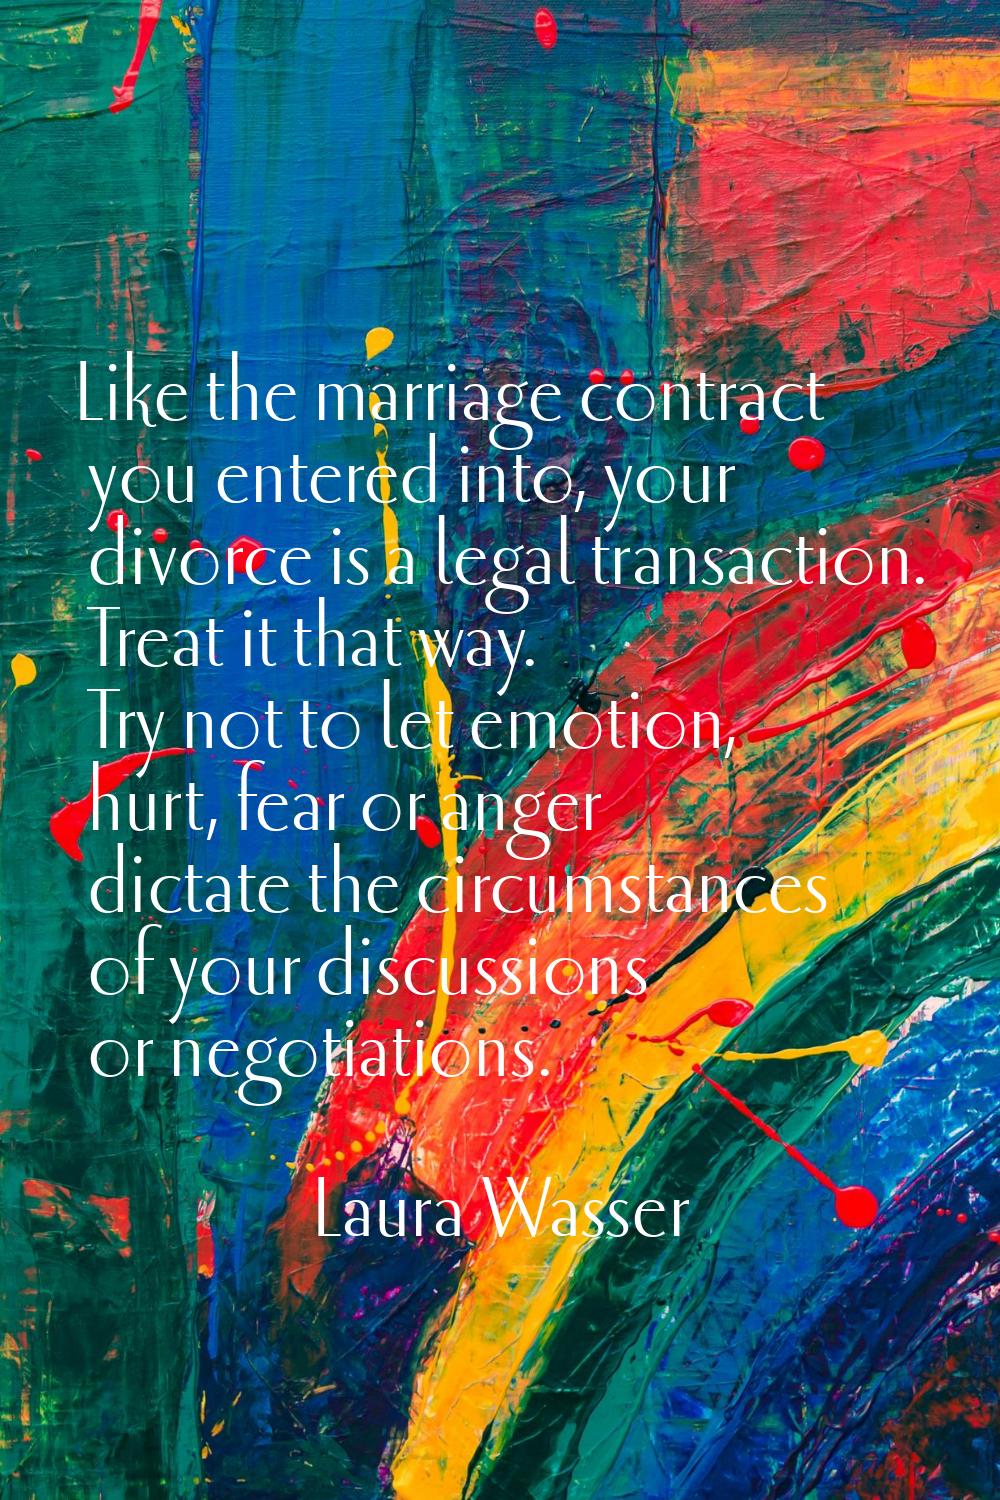 Like the marriage contract you entered into, your divorce is a legal transaction. Treat it that way